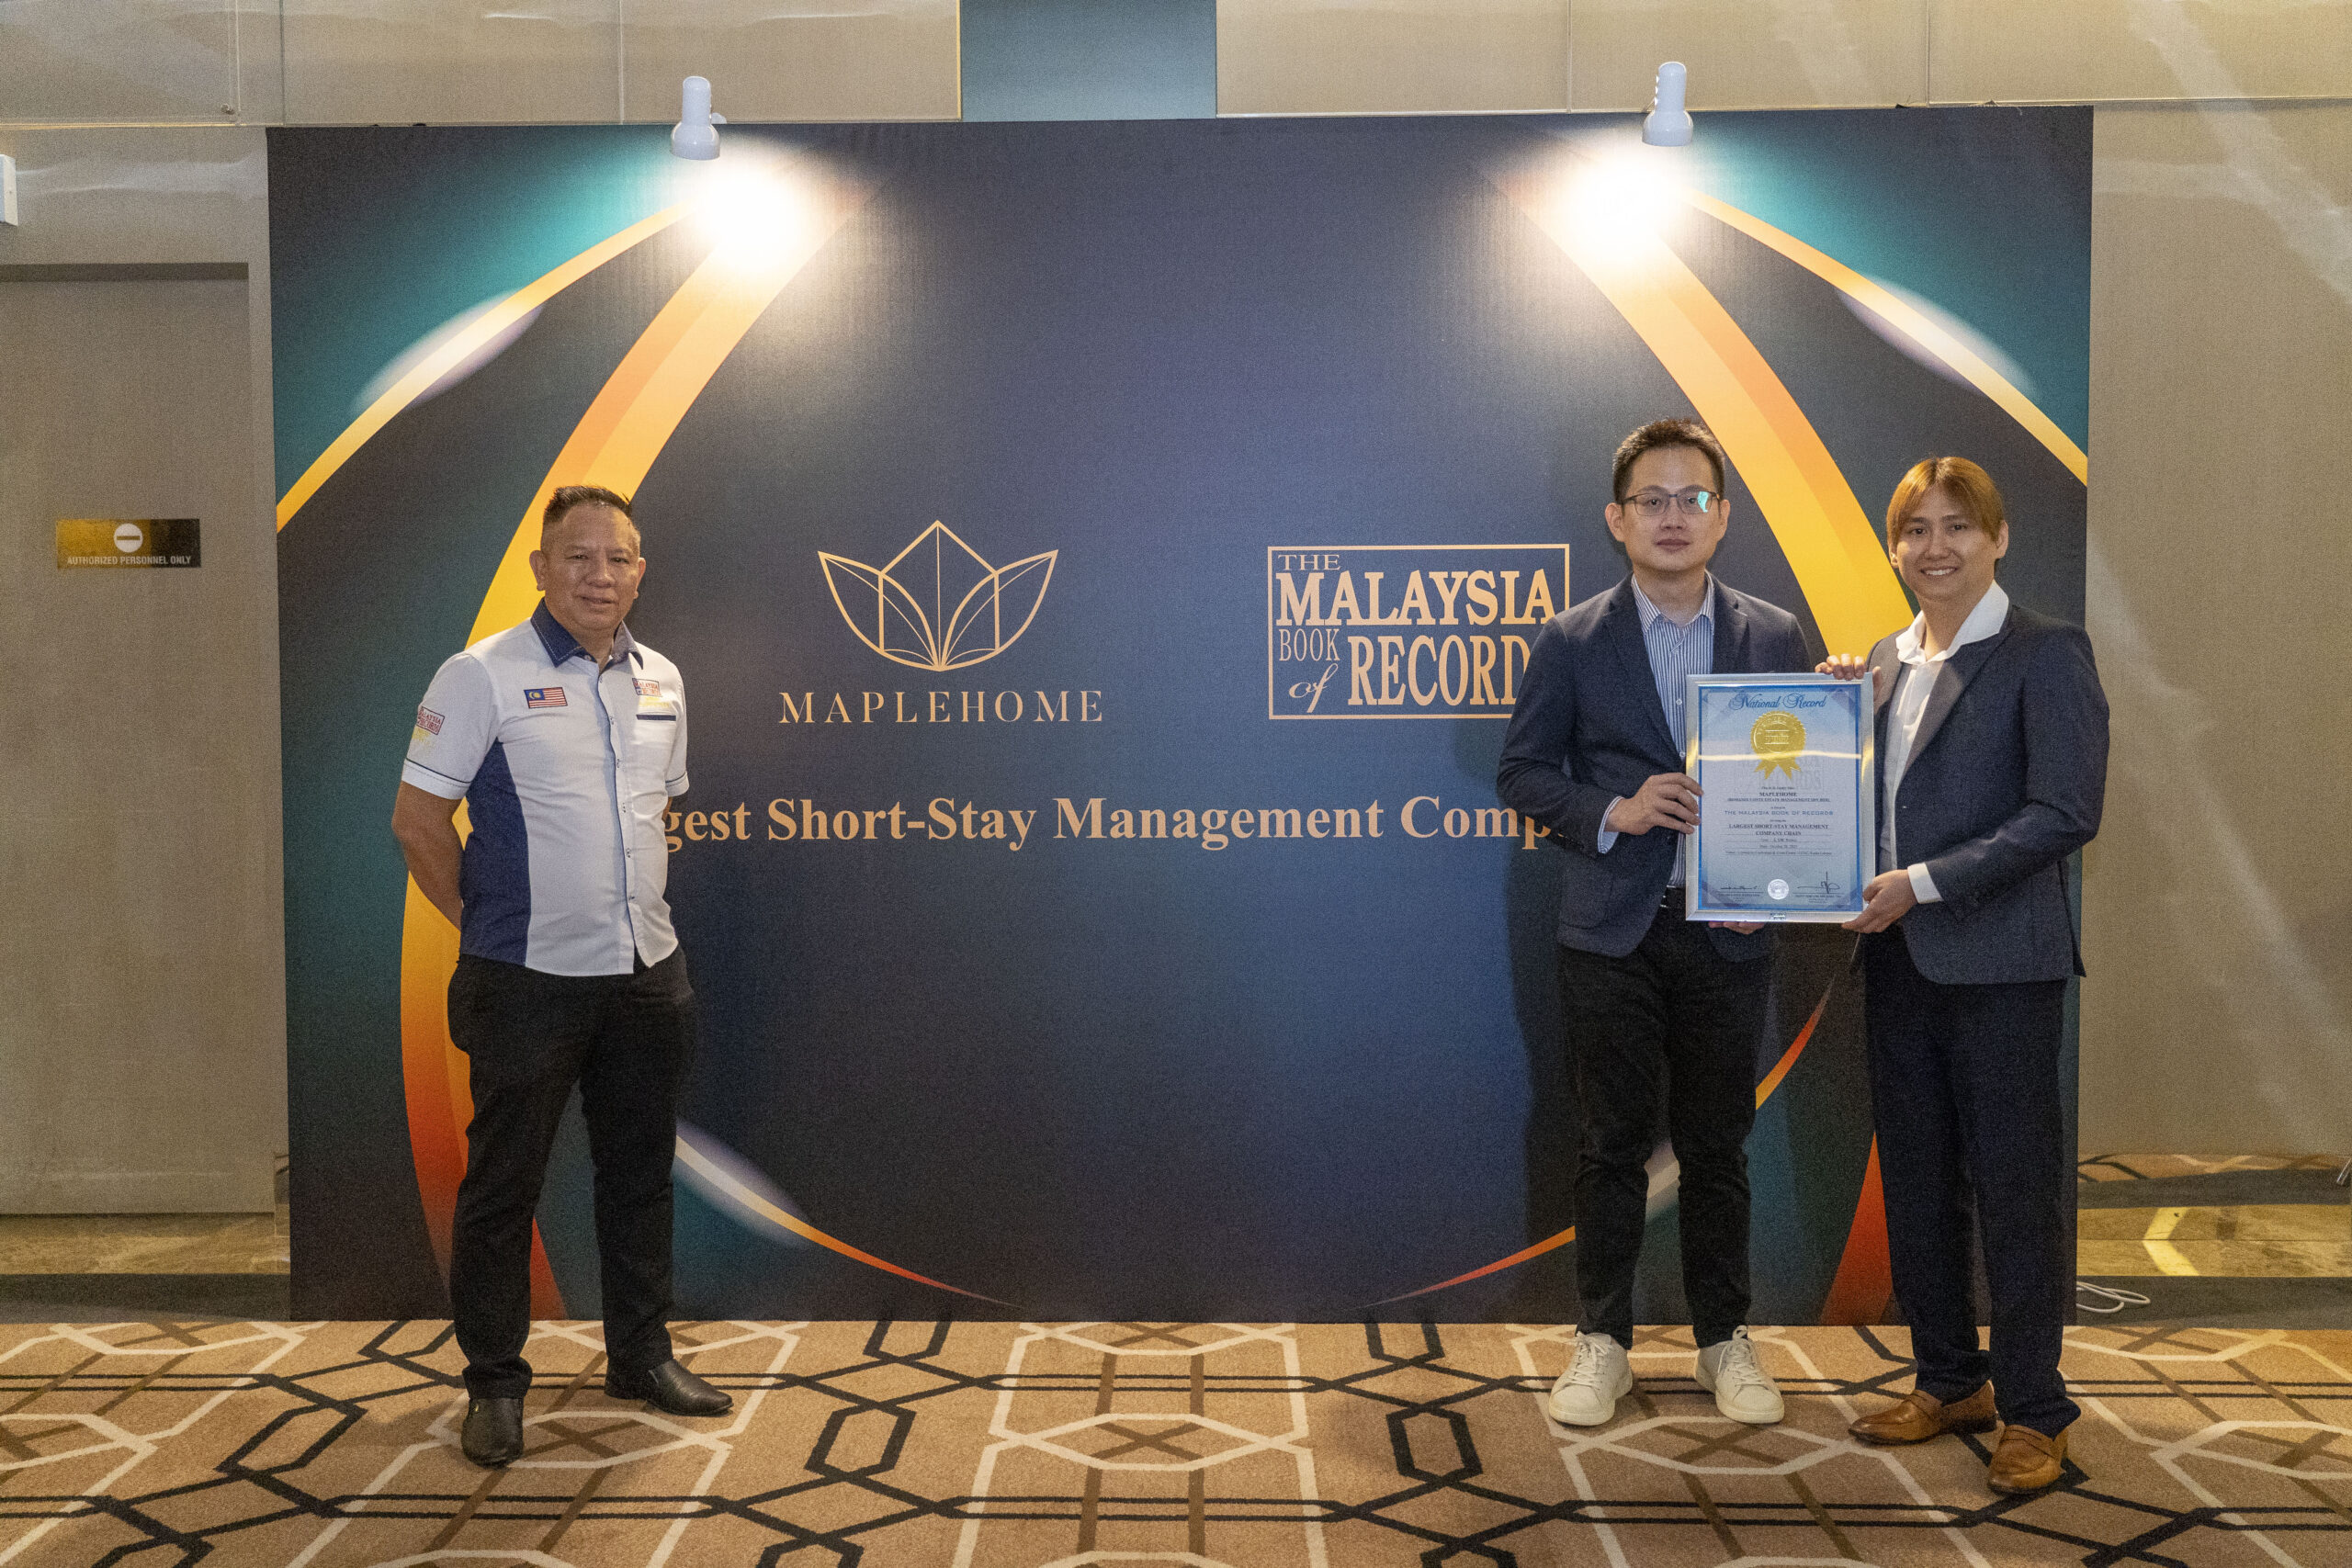 Maplehome securing the title of %22largest short-stay management company chain%22 from the malaysia book of record